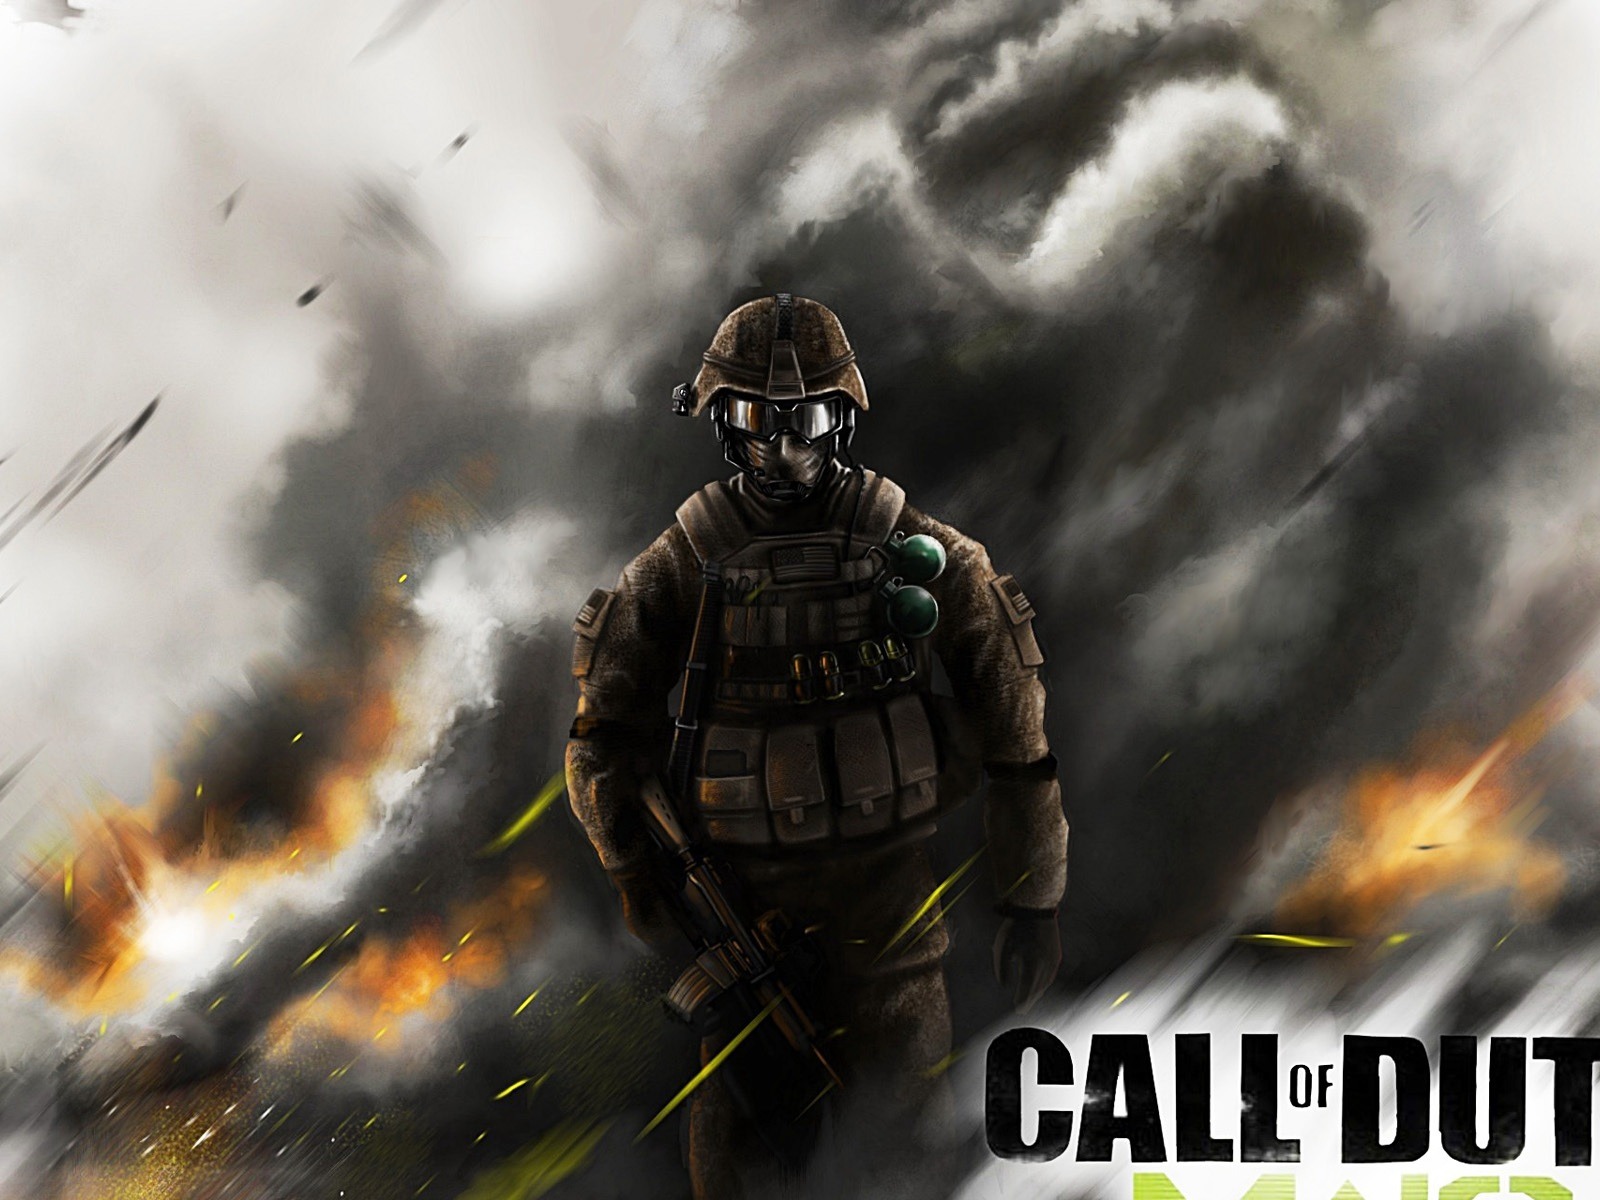 Call of Duty: MW3 wallpapers HD #15 - 1600x1200